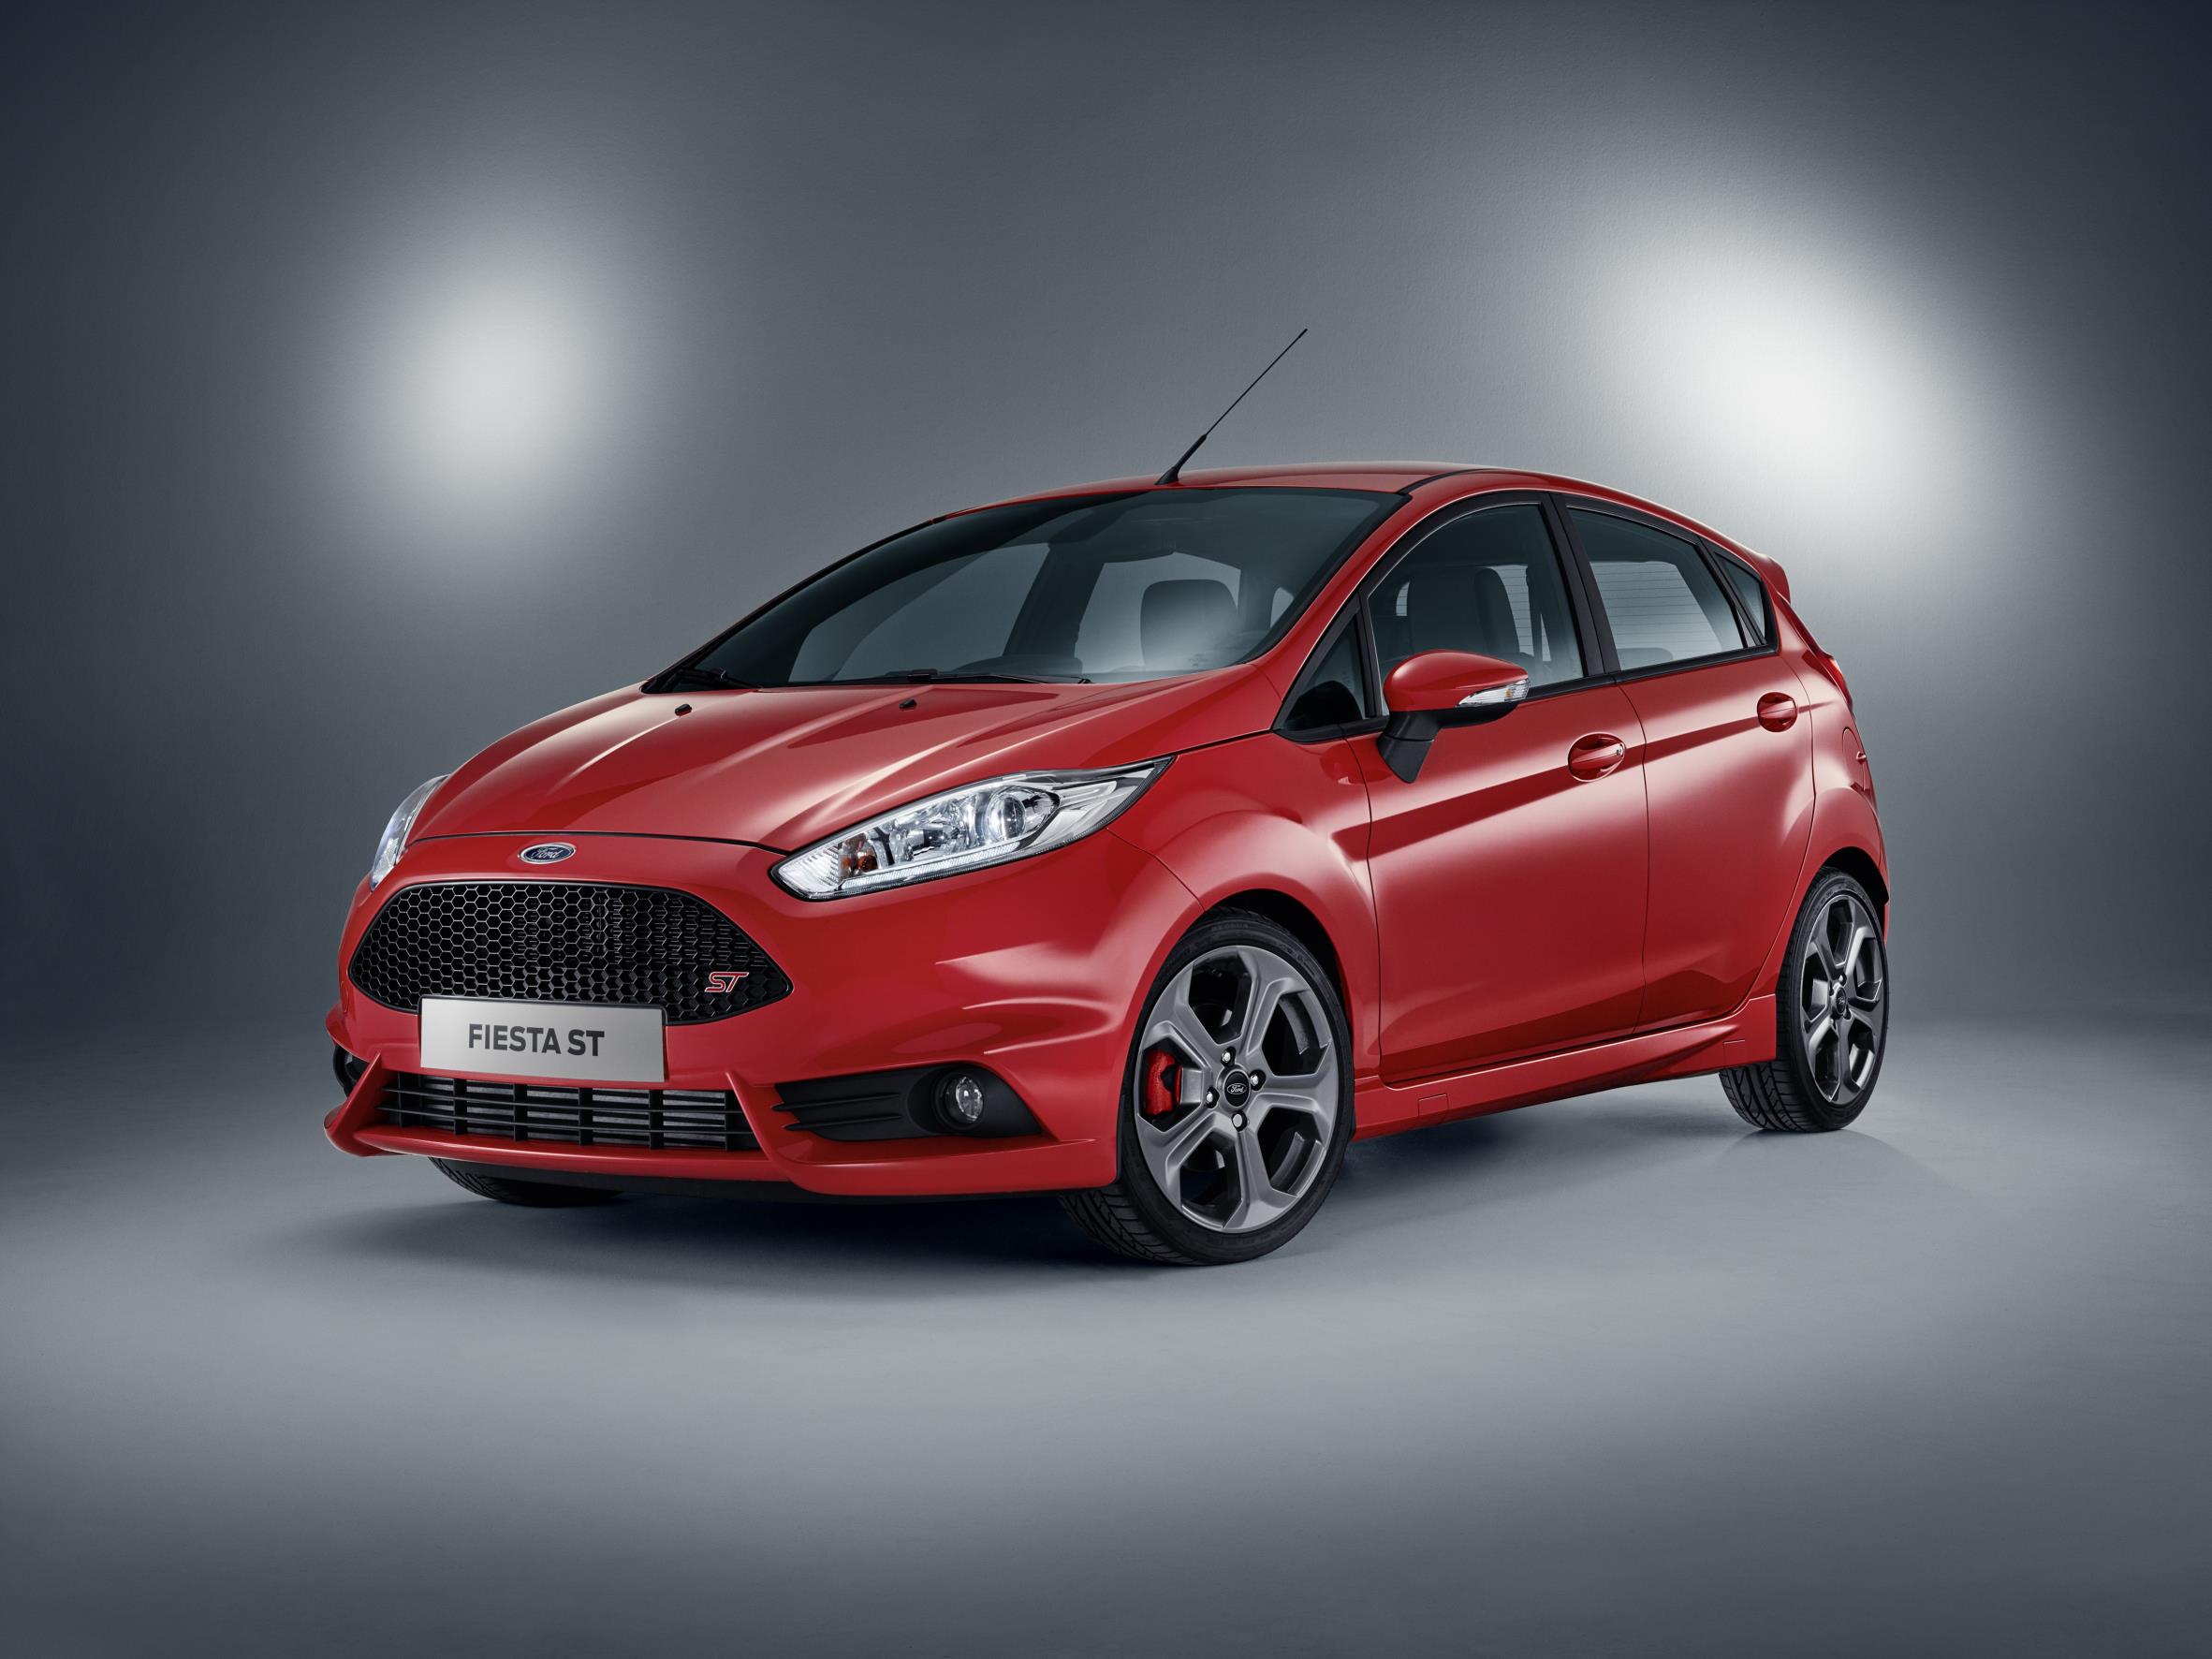 2017 Ford Fiesta ST FiveDoor Introduced In Europe